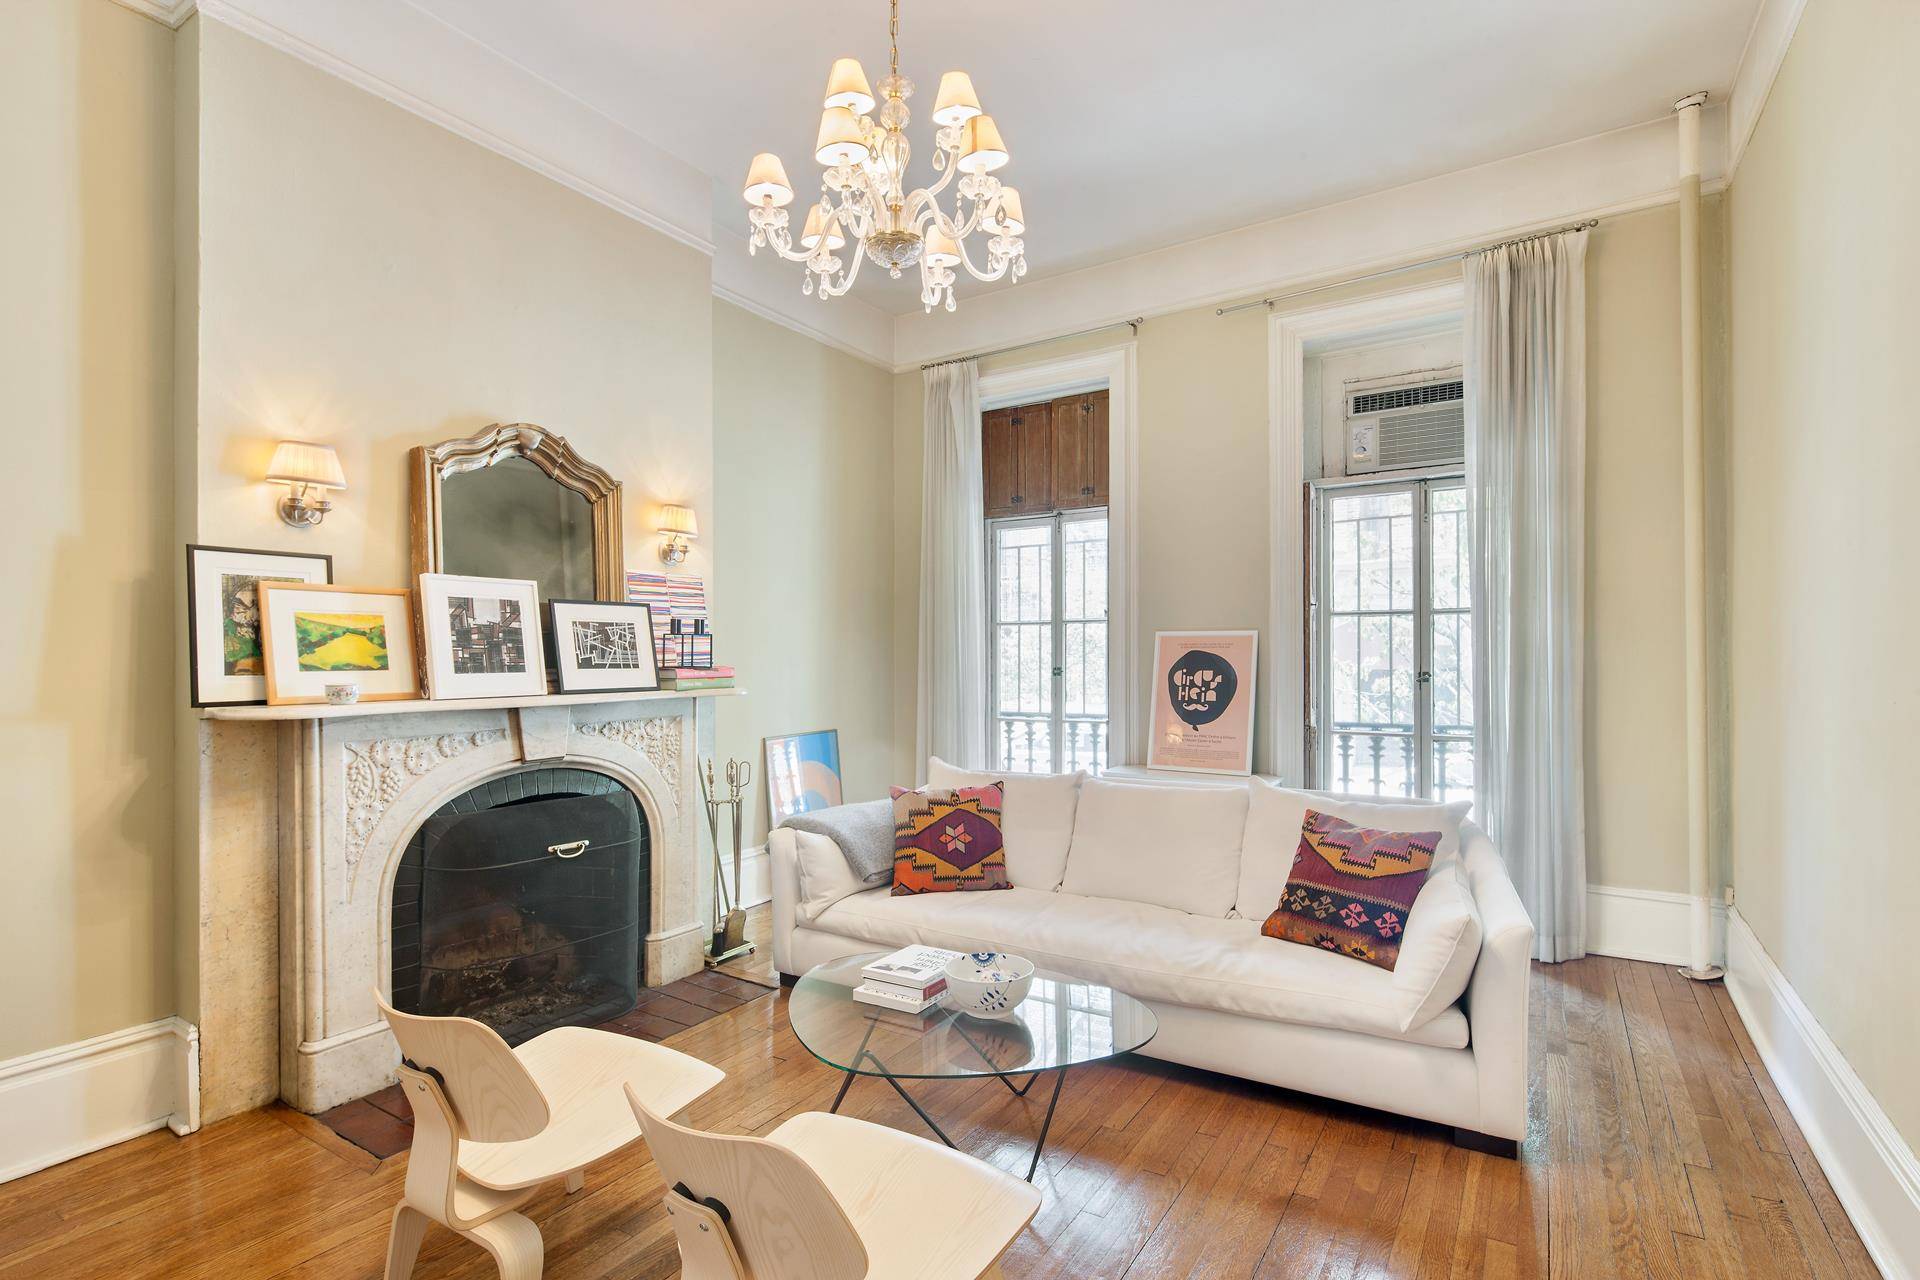 Wonderful west village brownstone parlor floor with private wood deck off of the bedroom, two wood burning fireplaces, high ceilings, hardwood floors, top of the line kitchen, with Subzero fridge, ...